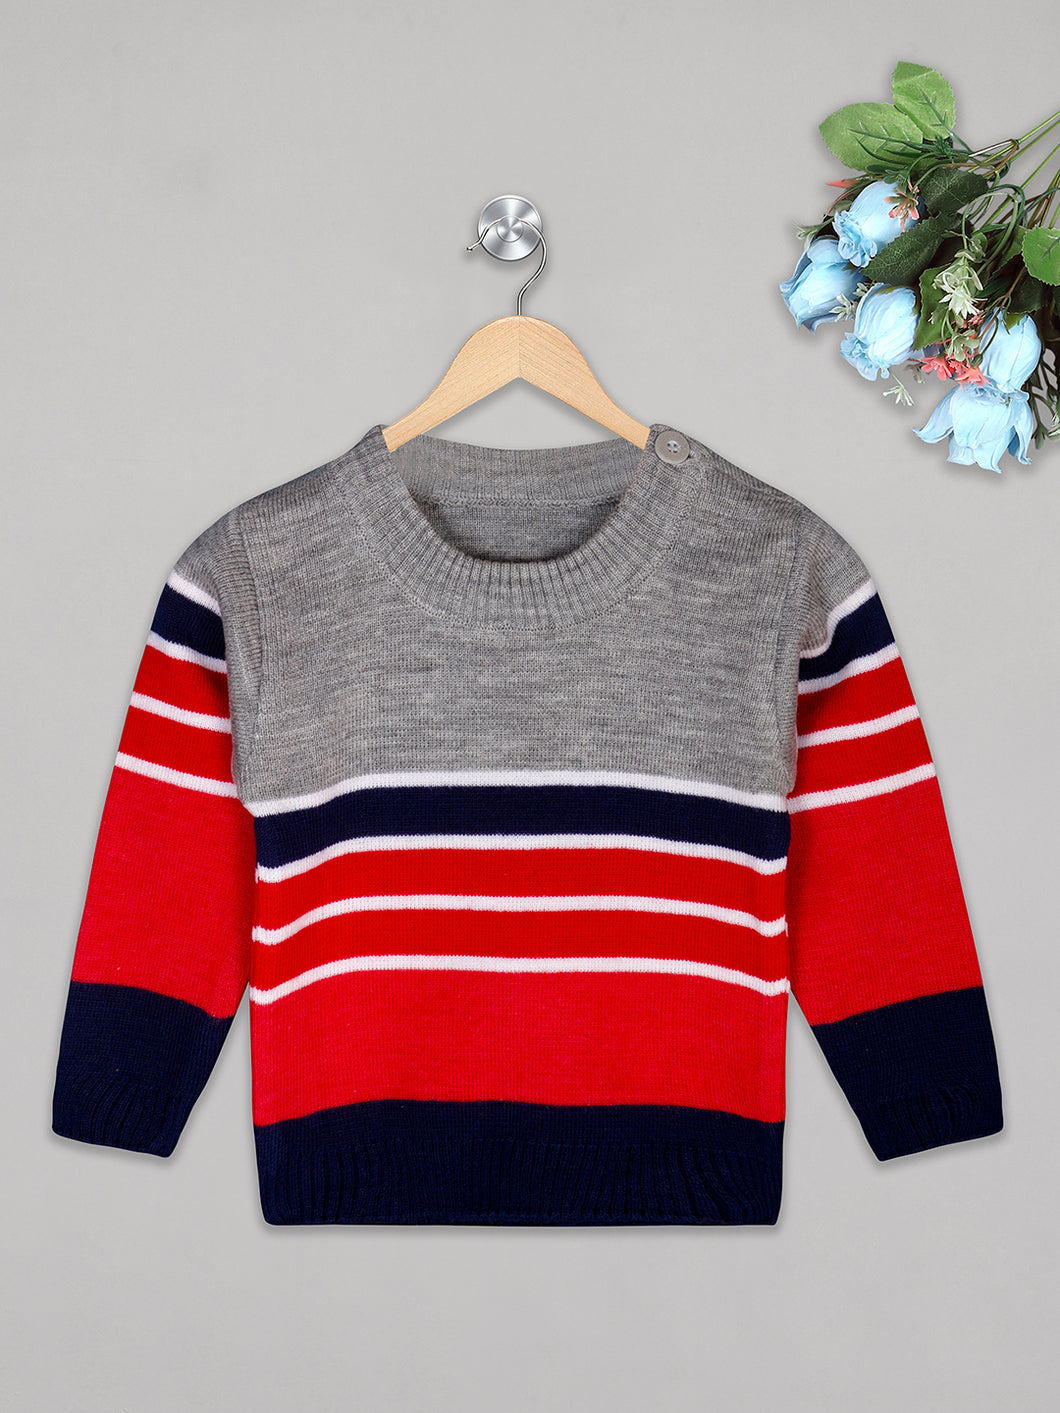 Boys winter woolen full sleeves round neck  stripes sweater in navy, white and grey combination